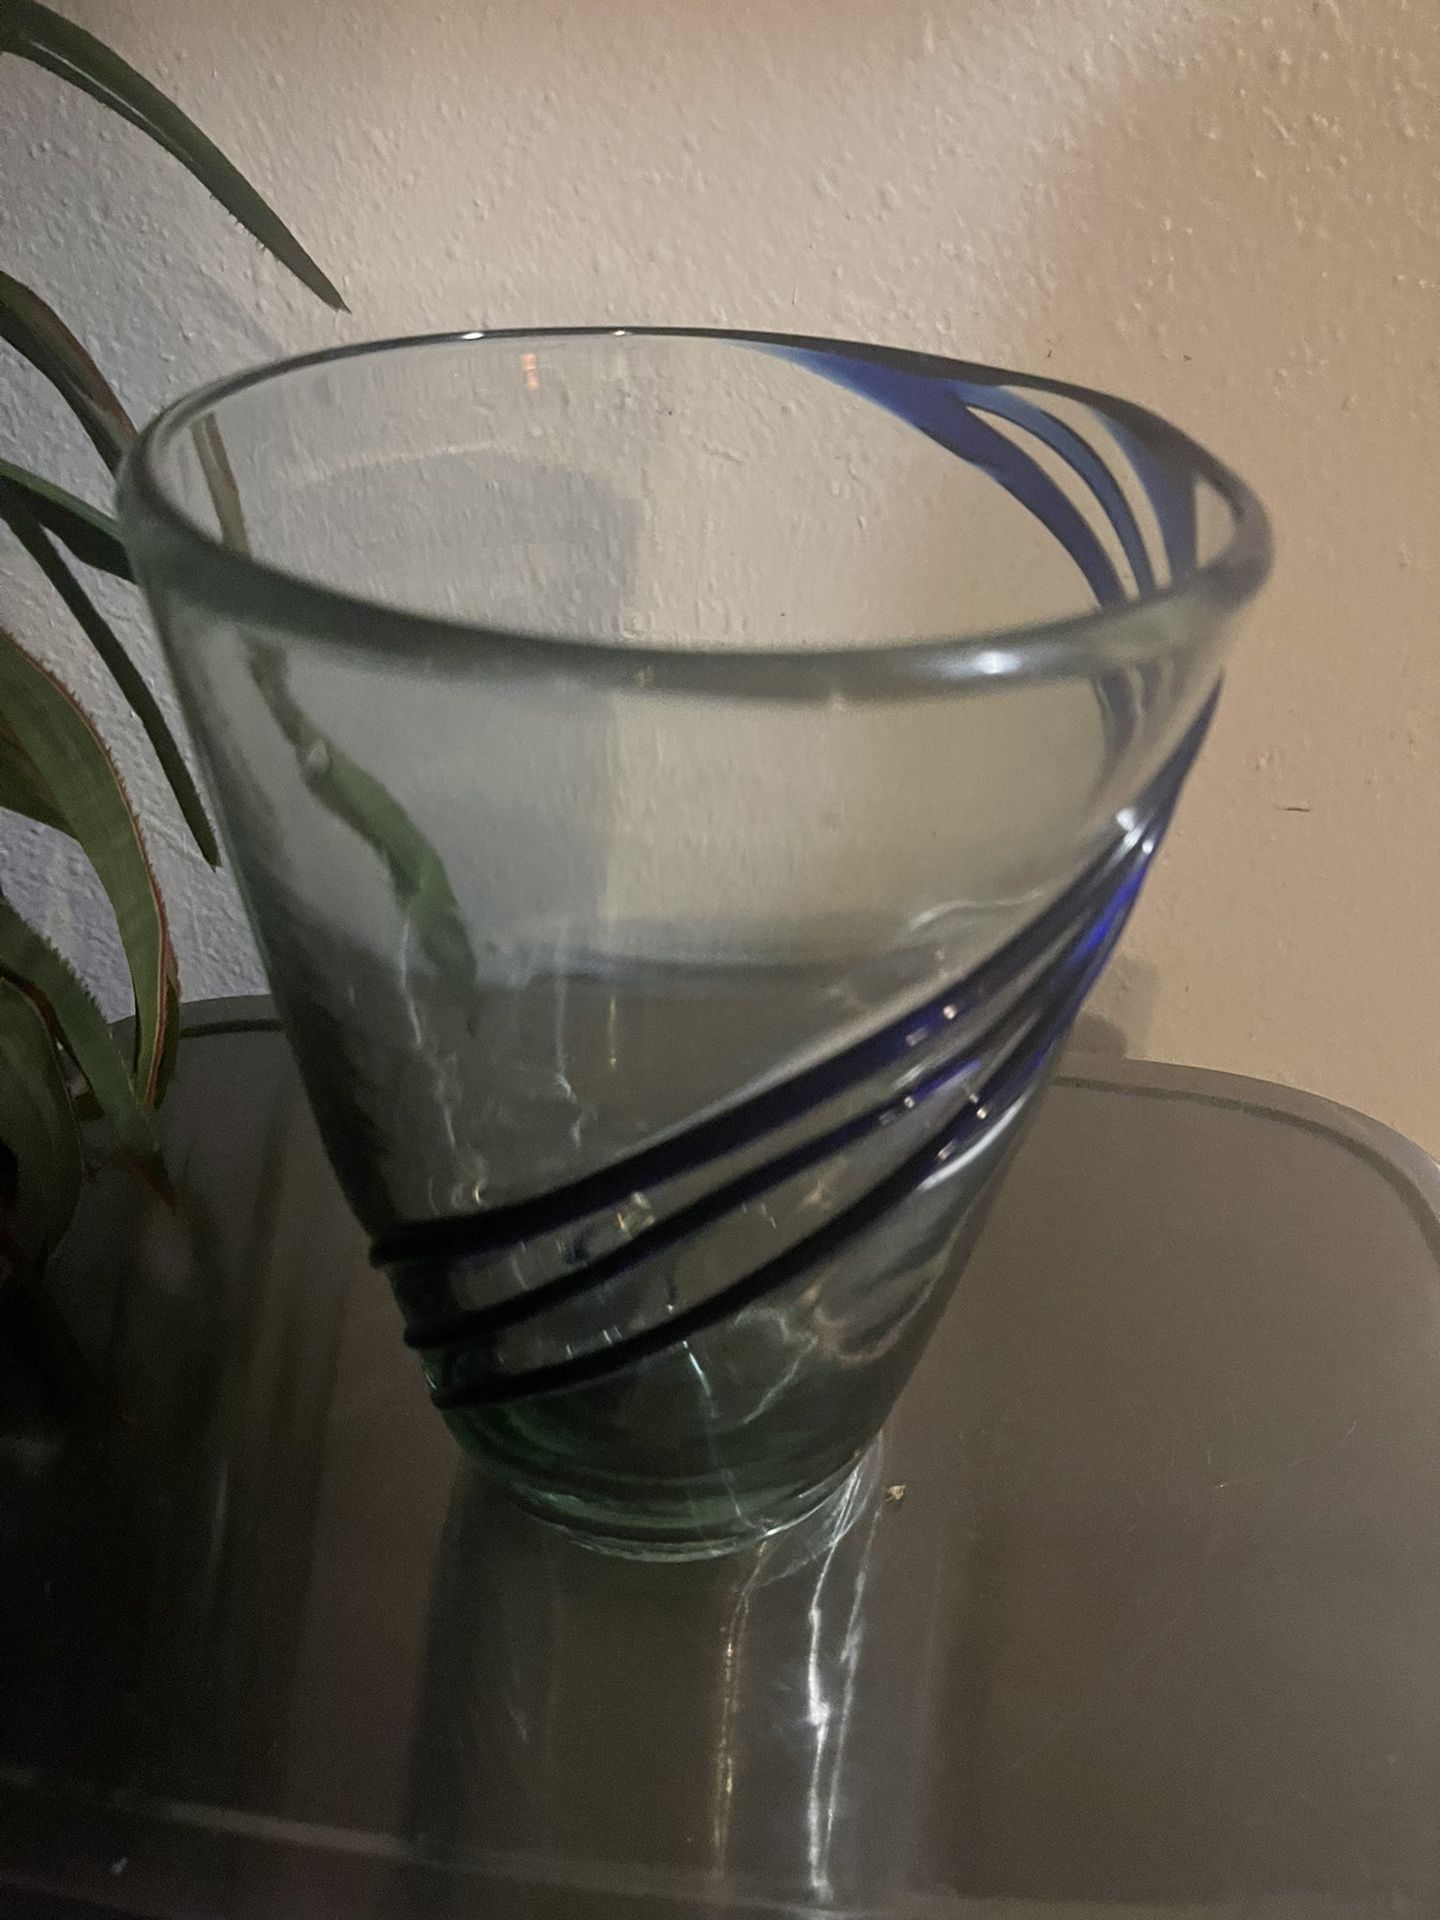 Vintage Kosta Boda Crystal Vase With Veins Of Glass Wrapped Around!  Mo Two The Same - Mint Condition 